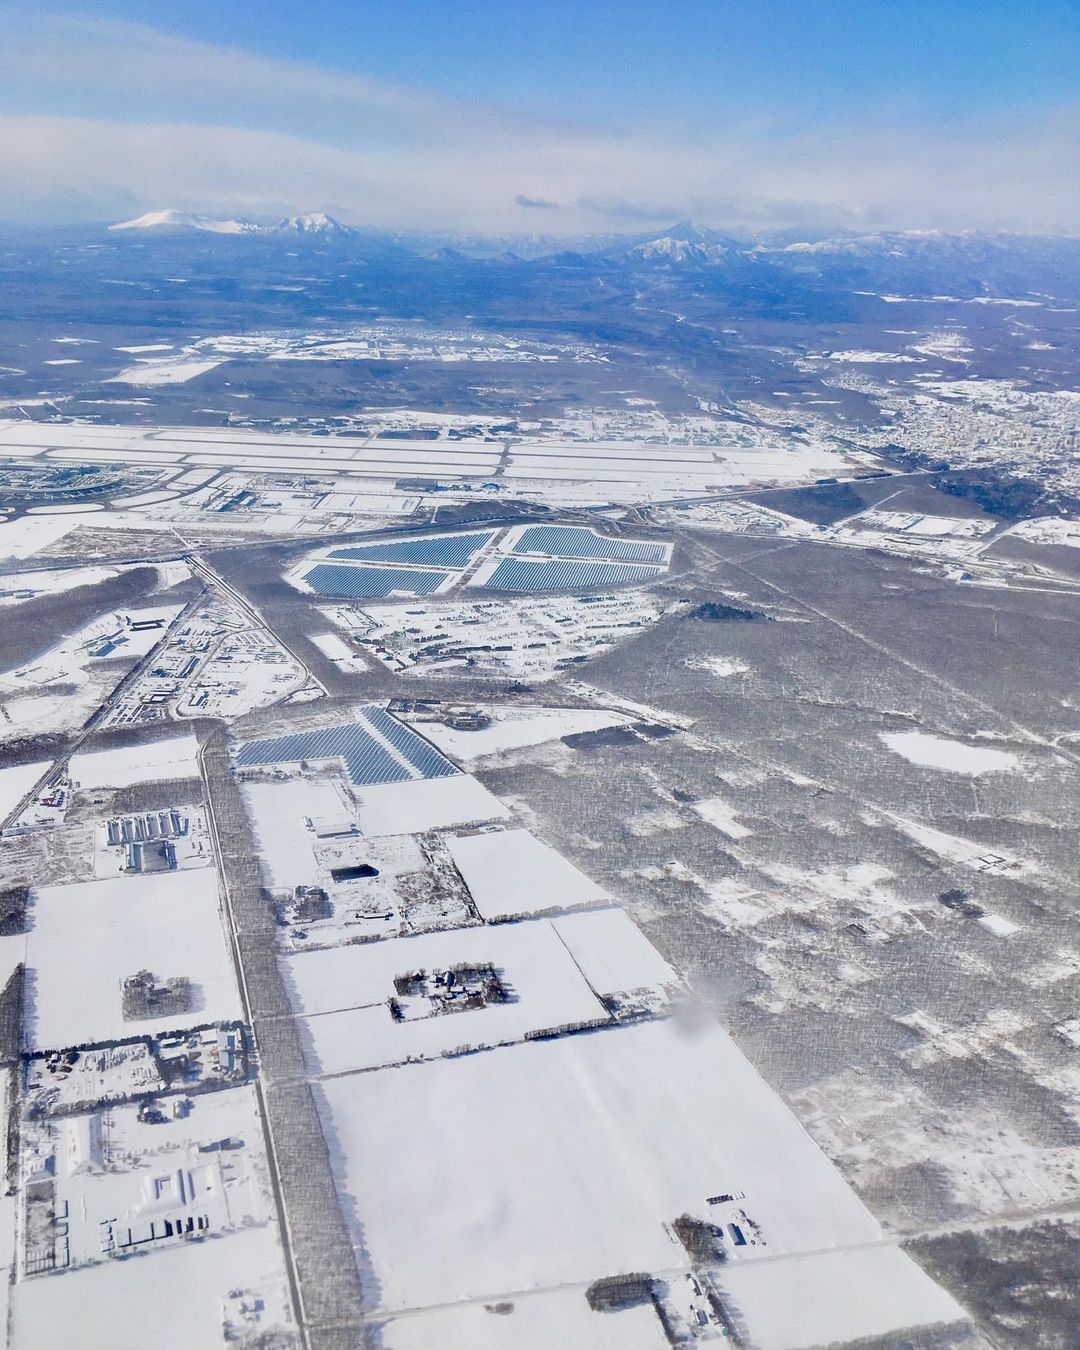 Chitose City seen from the sky (Chitose)